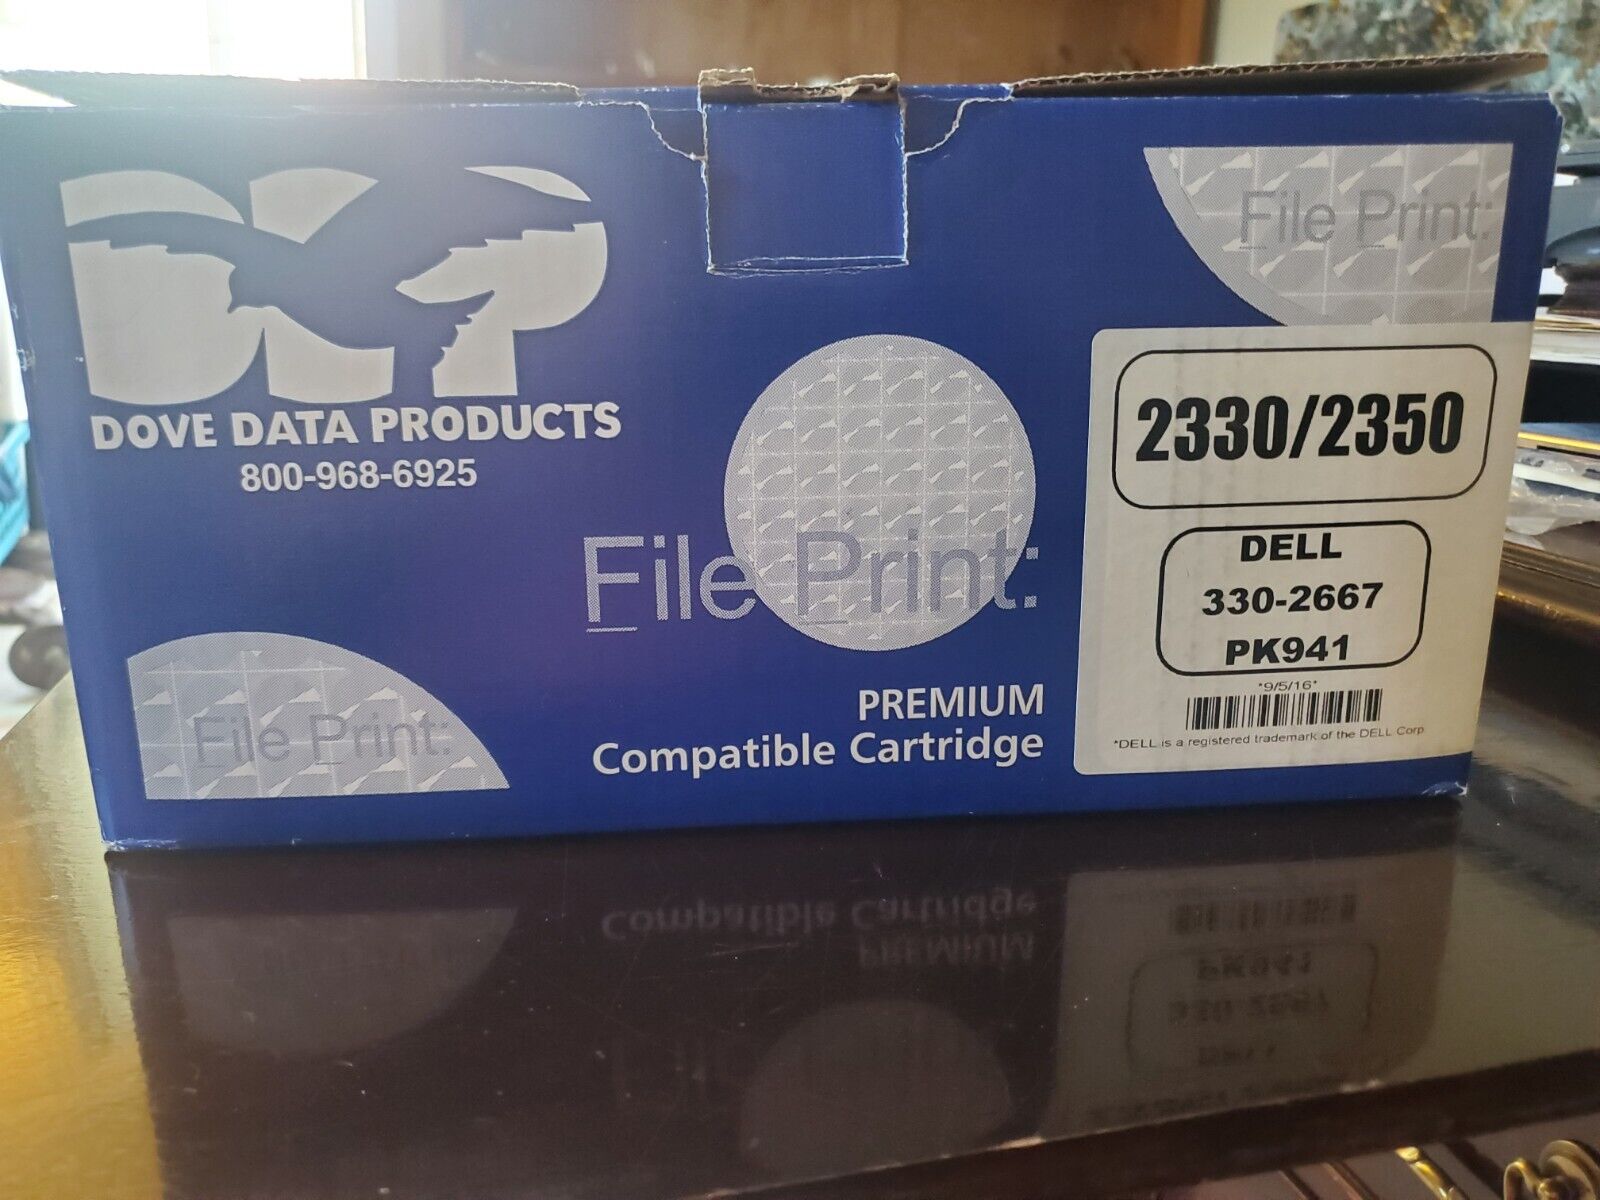 Dell Compatible Pk941 New Ink Cartridge 2330/2350 330-2667 DLL20200MR